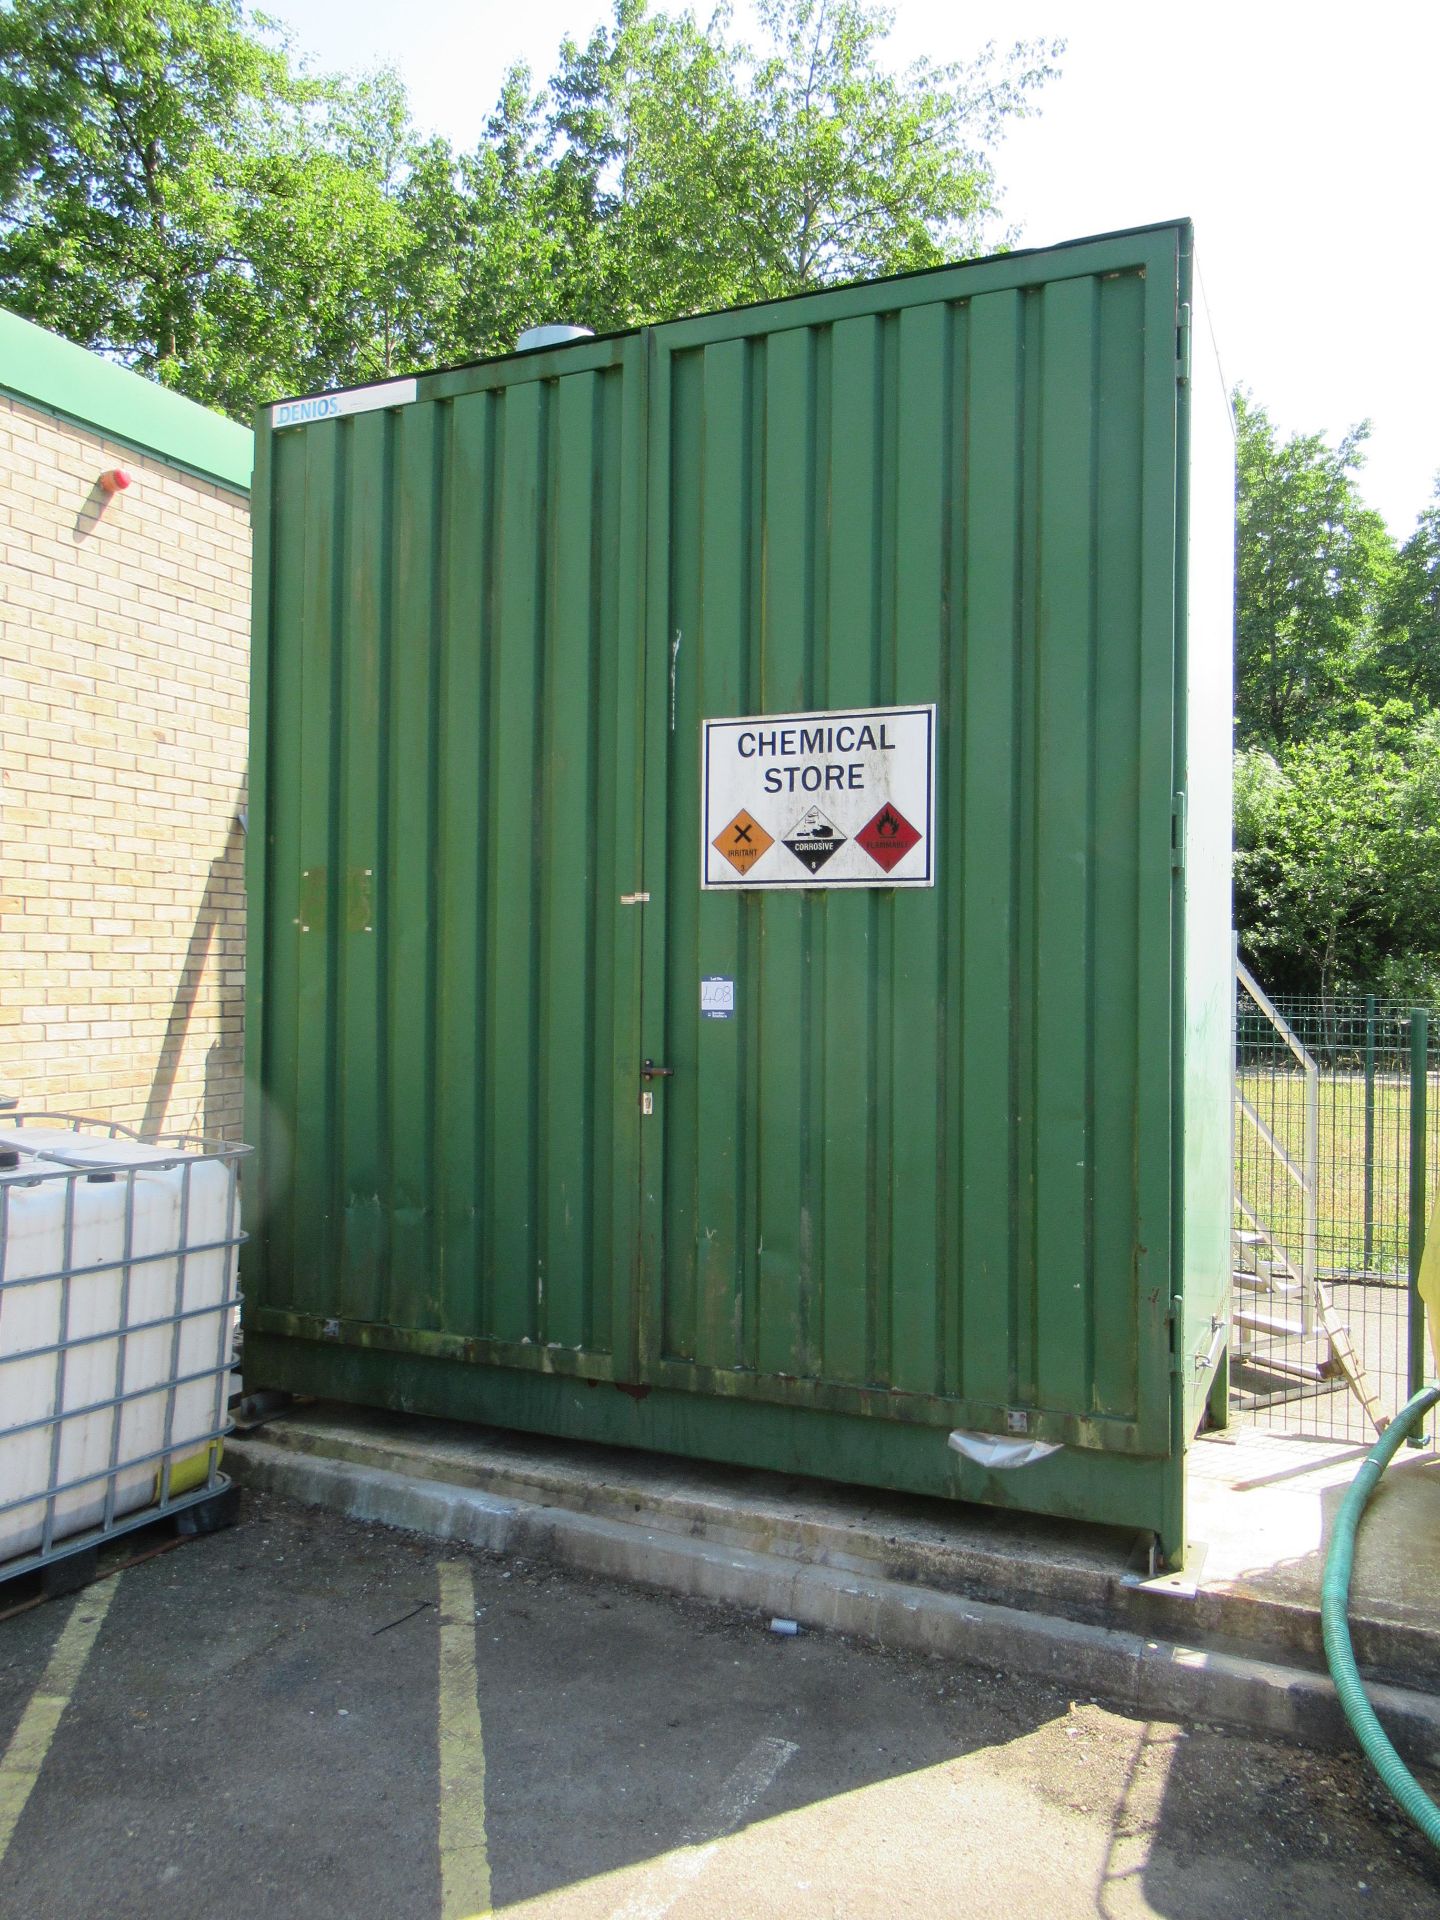 Denios steel chemical storage container external dimensions 3120mm wide x 1480mm deep x 3500mm high